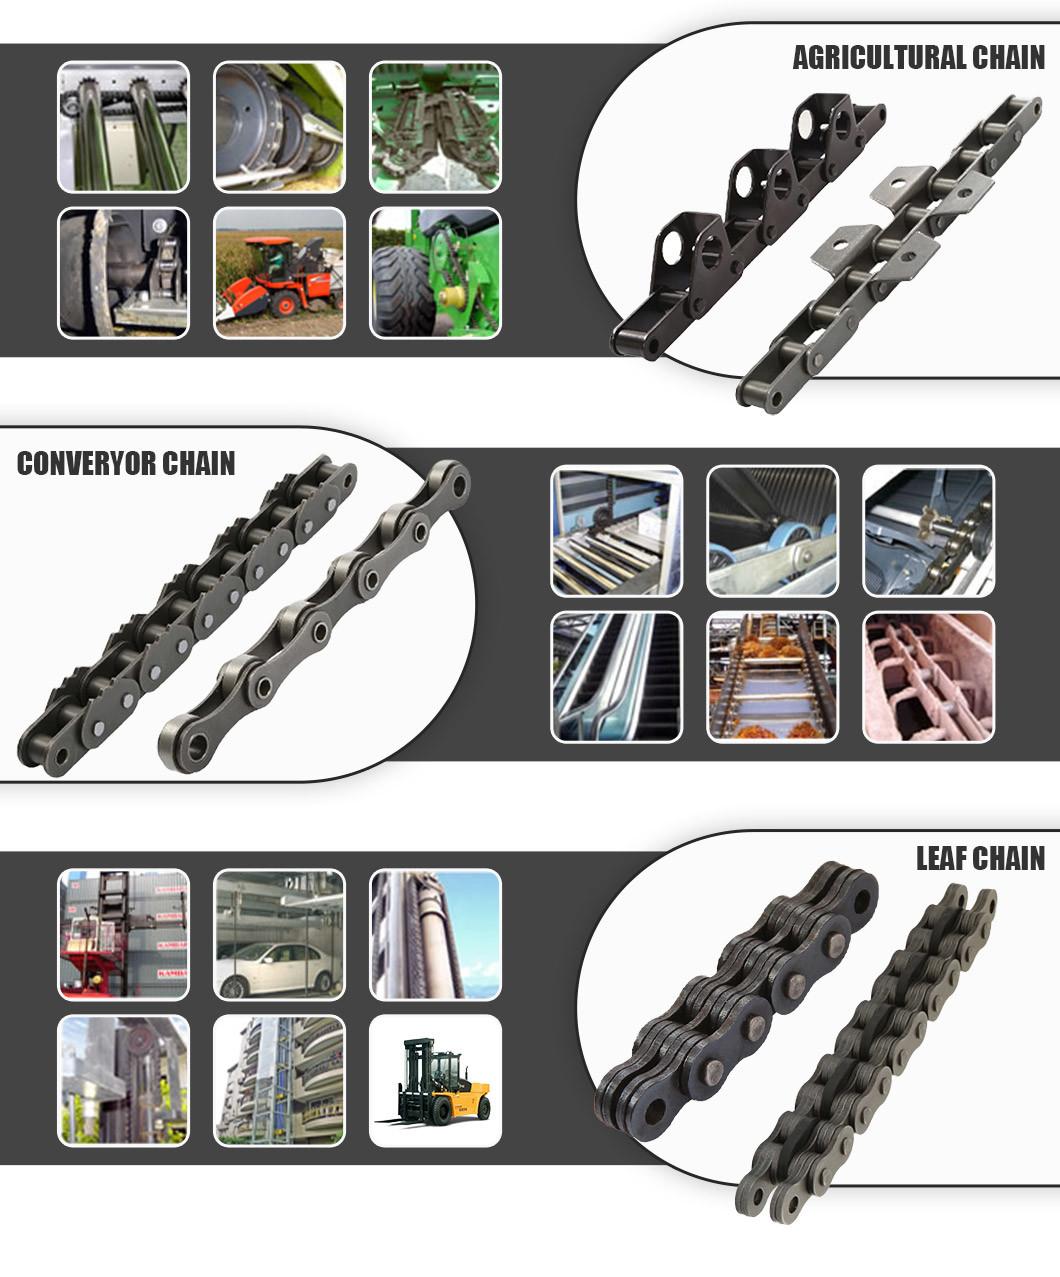 Heat Resistant Alloy/Carbon Steel Agricultural Chain S55K1, S62A2K1, S77K1